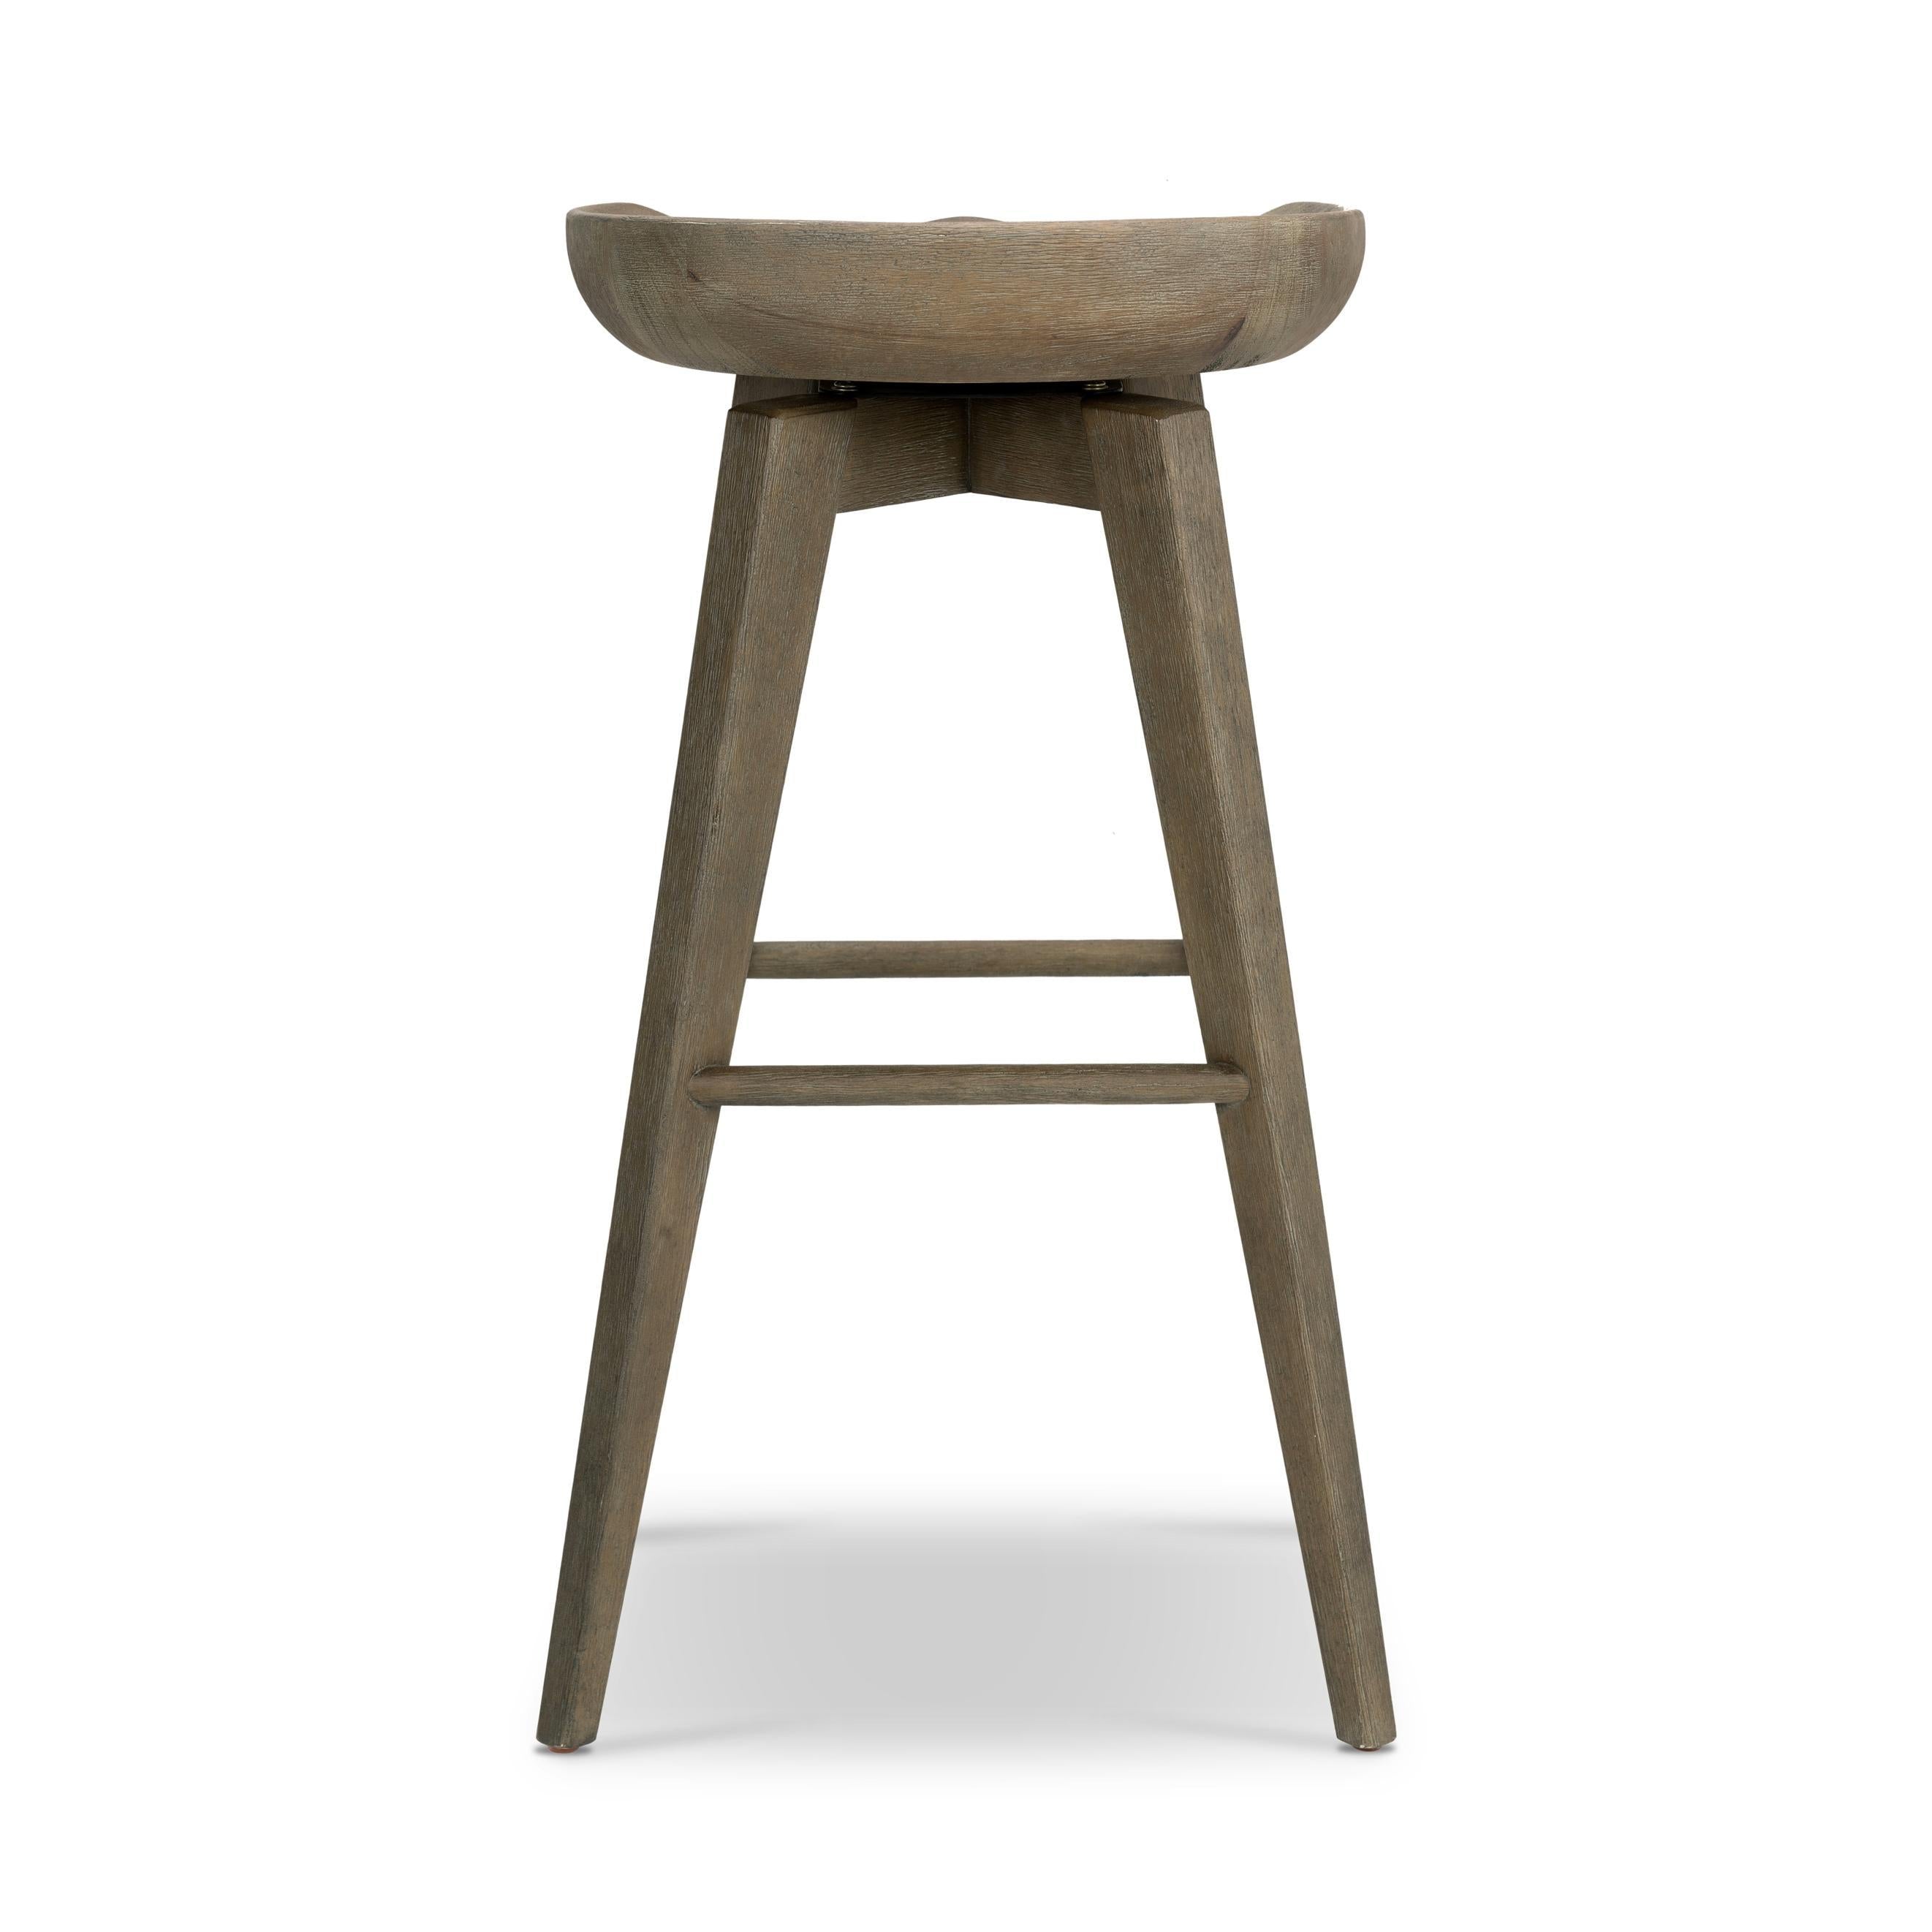 A fresh spin on bar seating, the parawood Paramore Swivel Counter Stool is finished in a deep charcoal for a clean, sleek look. The stool is topped with a swivel. Amethyst Home provides interior design, new home construction design consulting, vintage area rugs, and lighting in the Portland metro area.